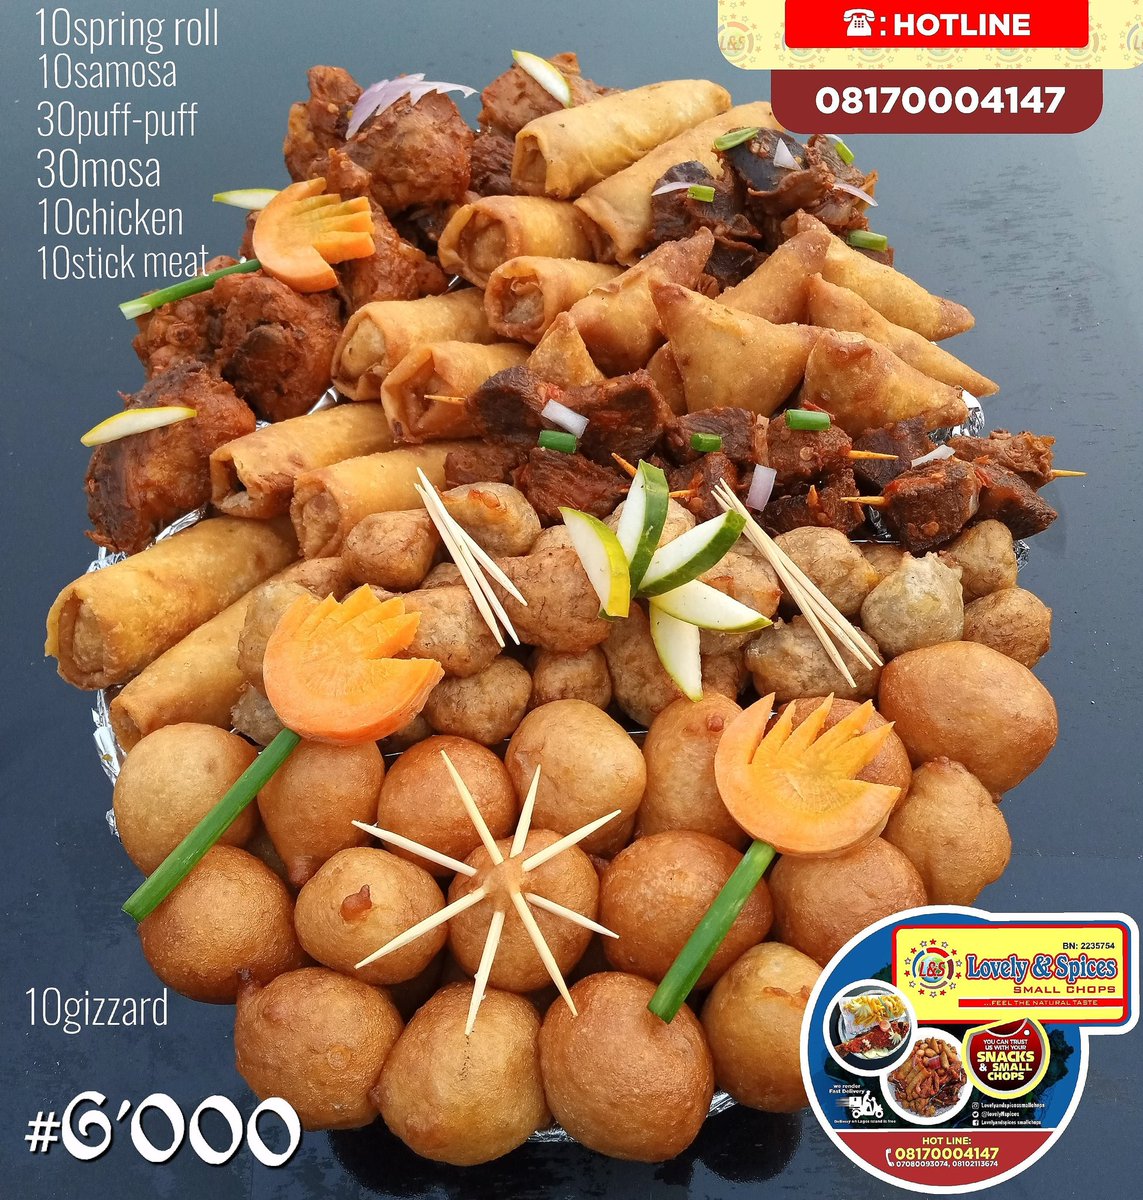 Our prices are very affordable
Hotline 08170004147
What's app 07080093074
#smallchops #smallchopsvendor #smallchopsinlagos #owanbevendor #owanbevendors #foodie #africanfood #africanfoodyummy #nigeriancuisine #nigerianfood #nigerianfoodie #lagosfoodie #weloveng